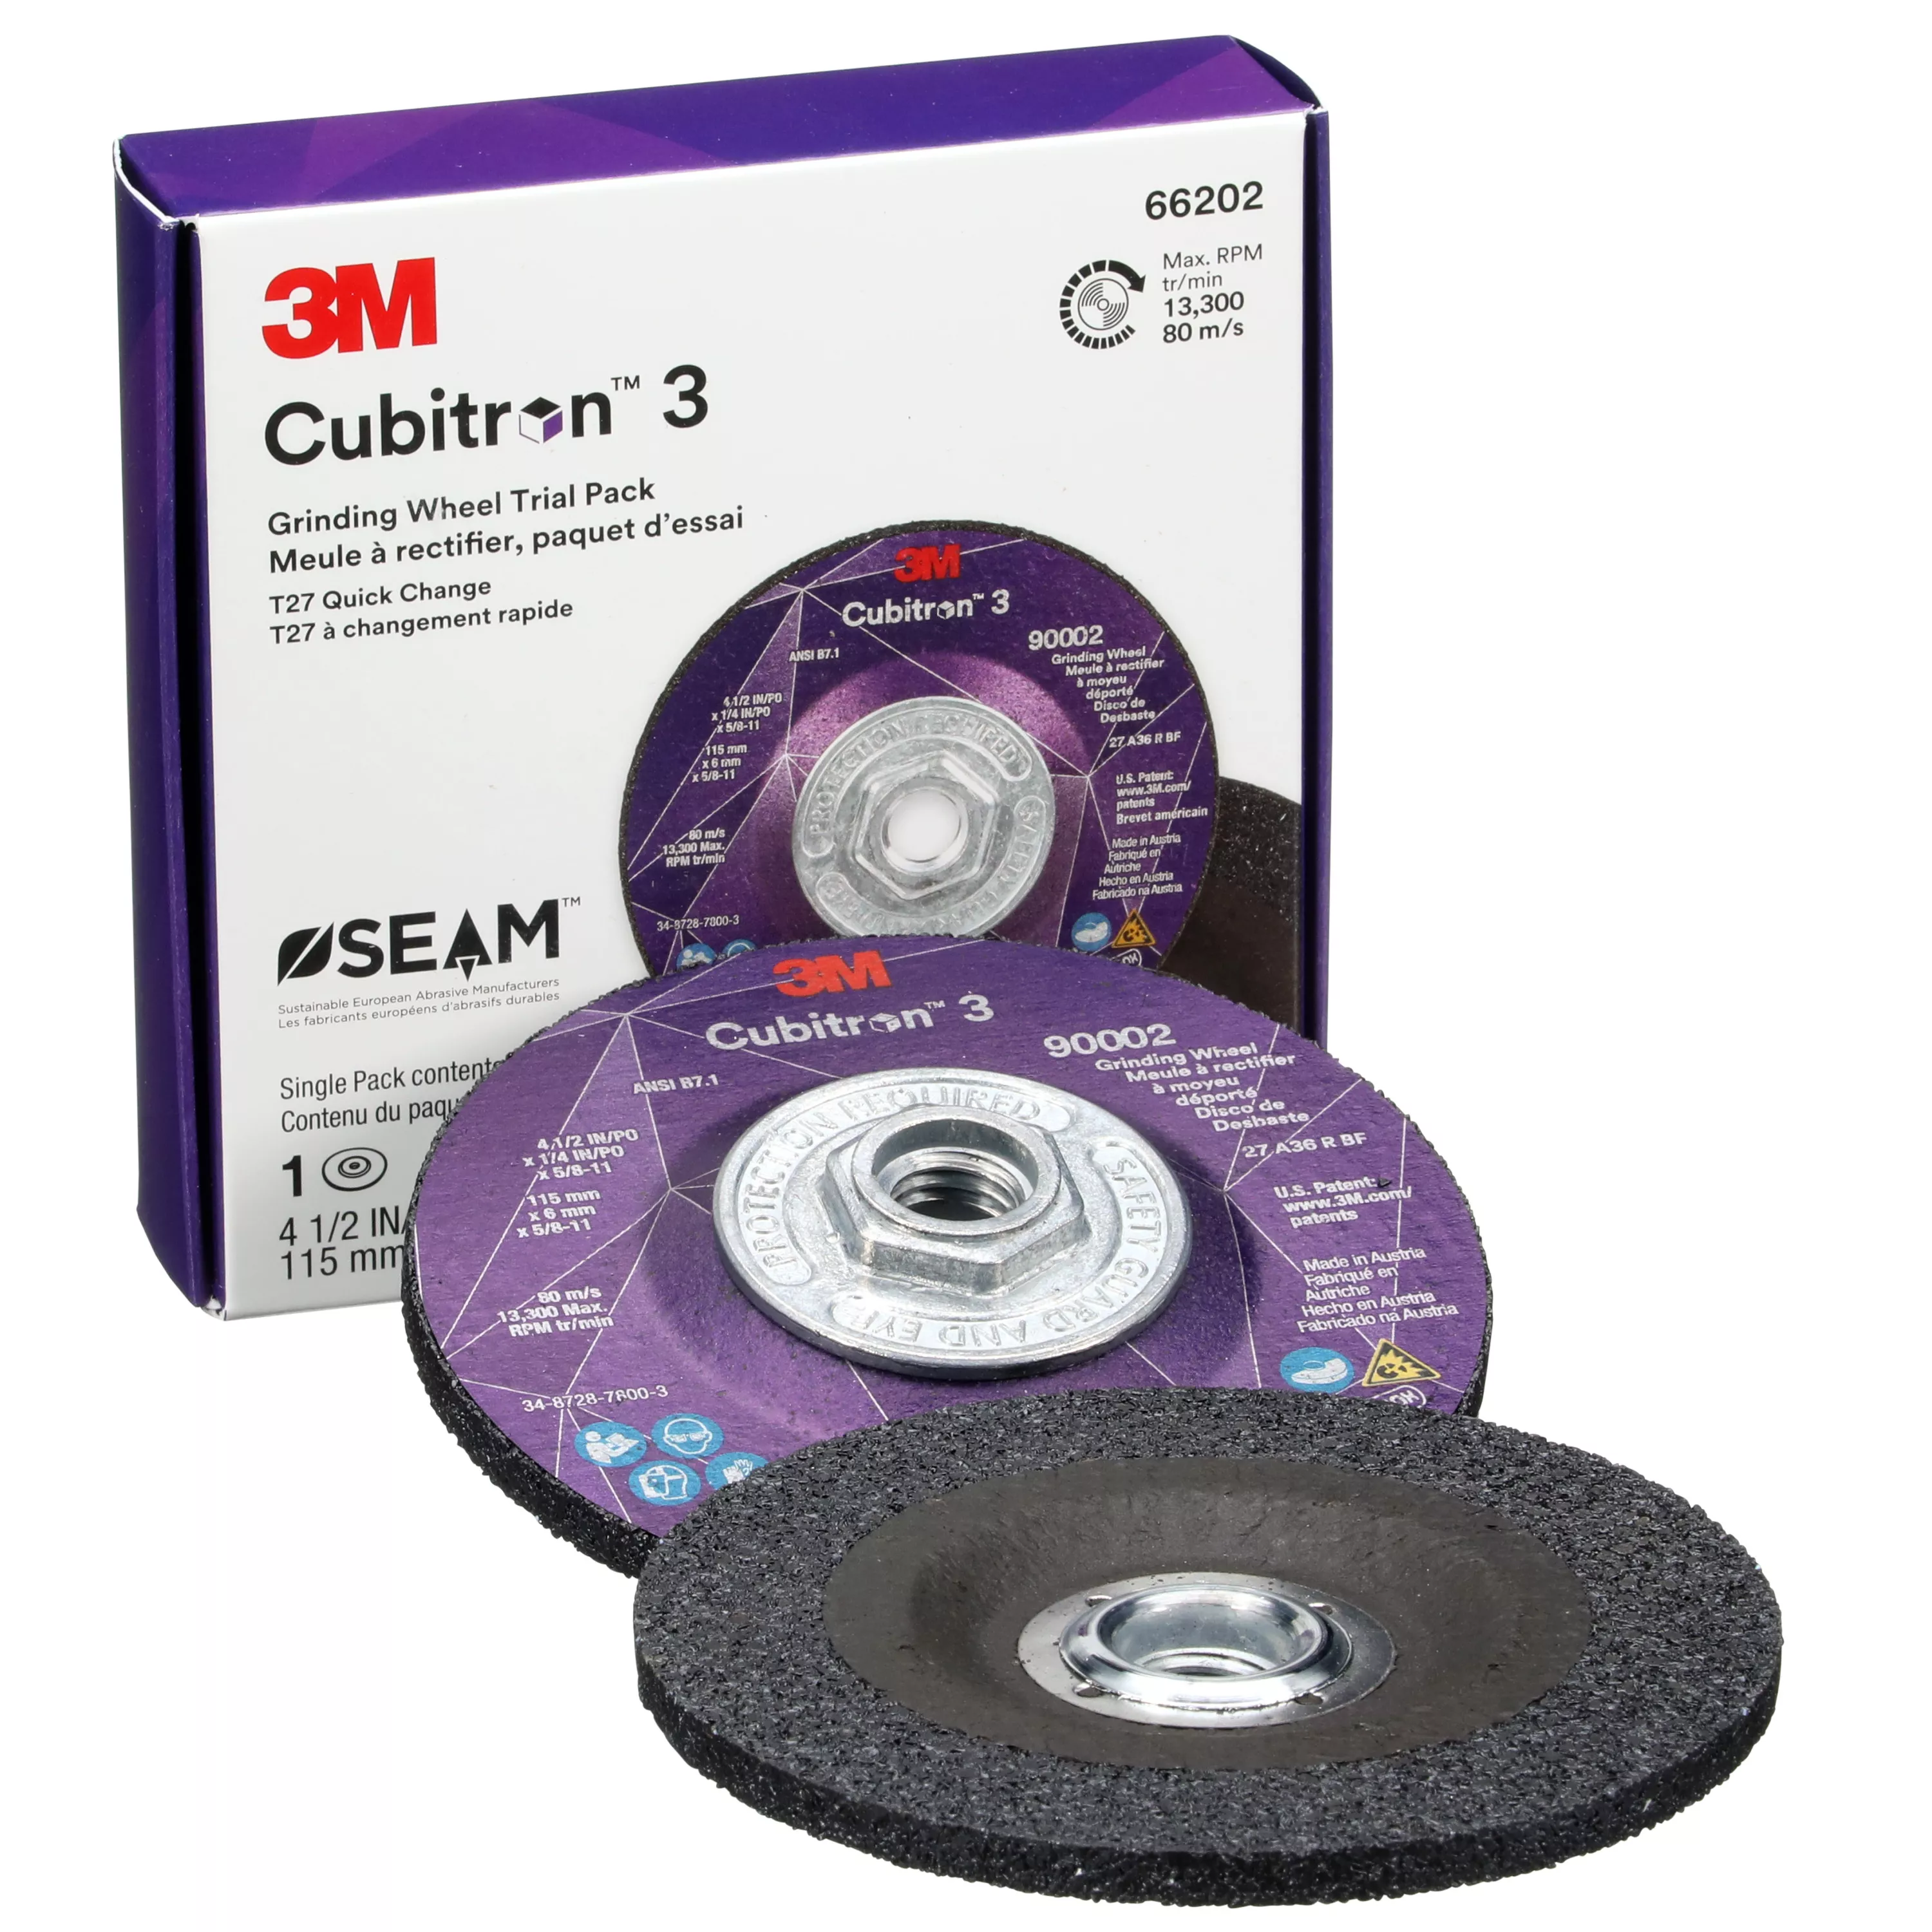 3M™ Cubitron™ 3 Depressed Center Grinding Wheel, 66202, 36+, Type 27, 4-1/2 in x 1/4 in x 5/8 in-11, ANSI, 10 ea/Case, Trial Pack